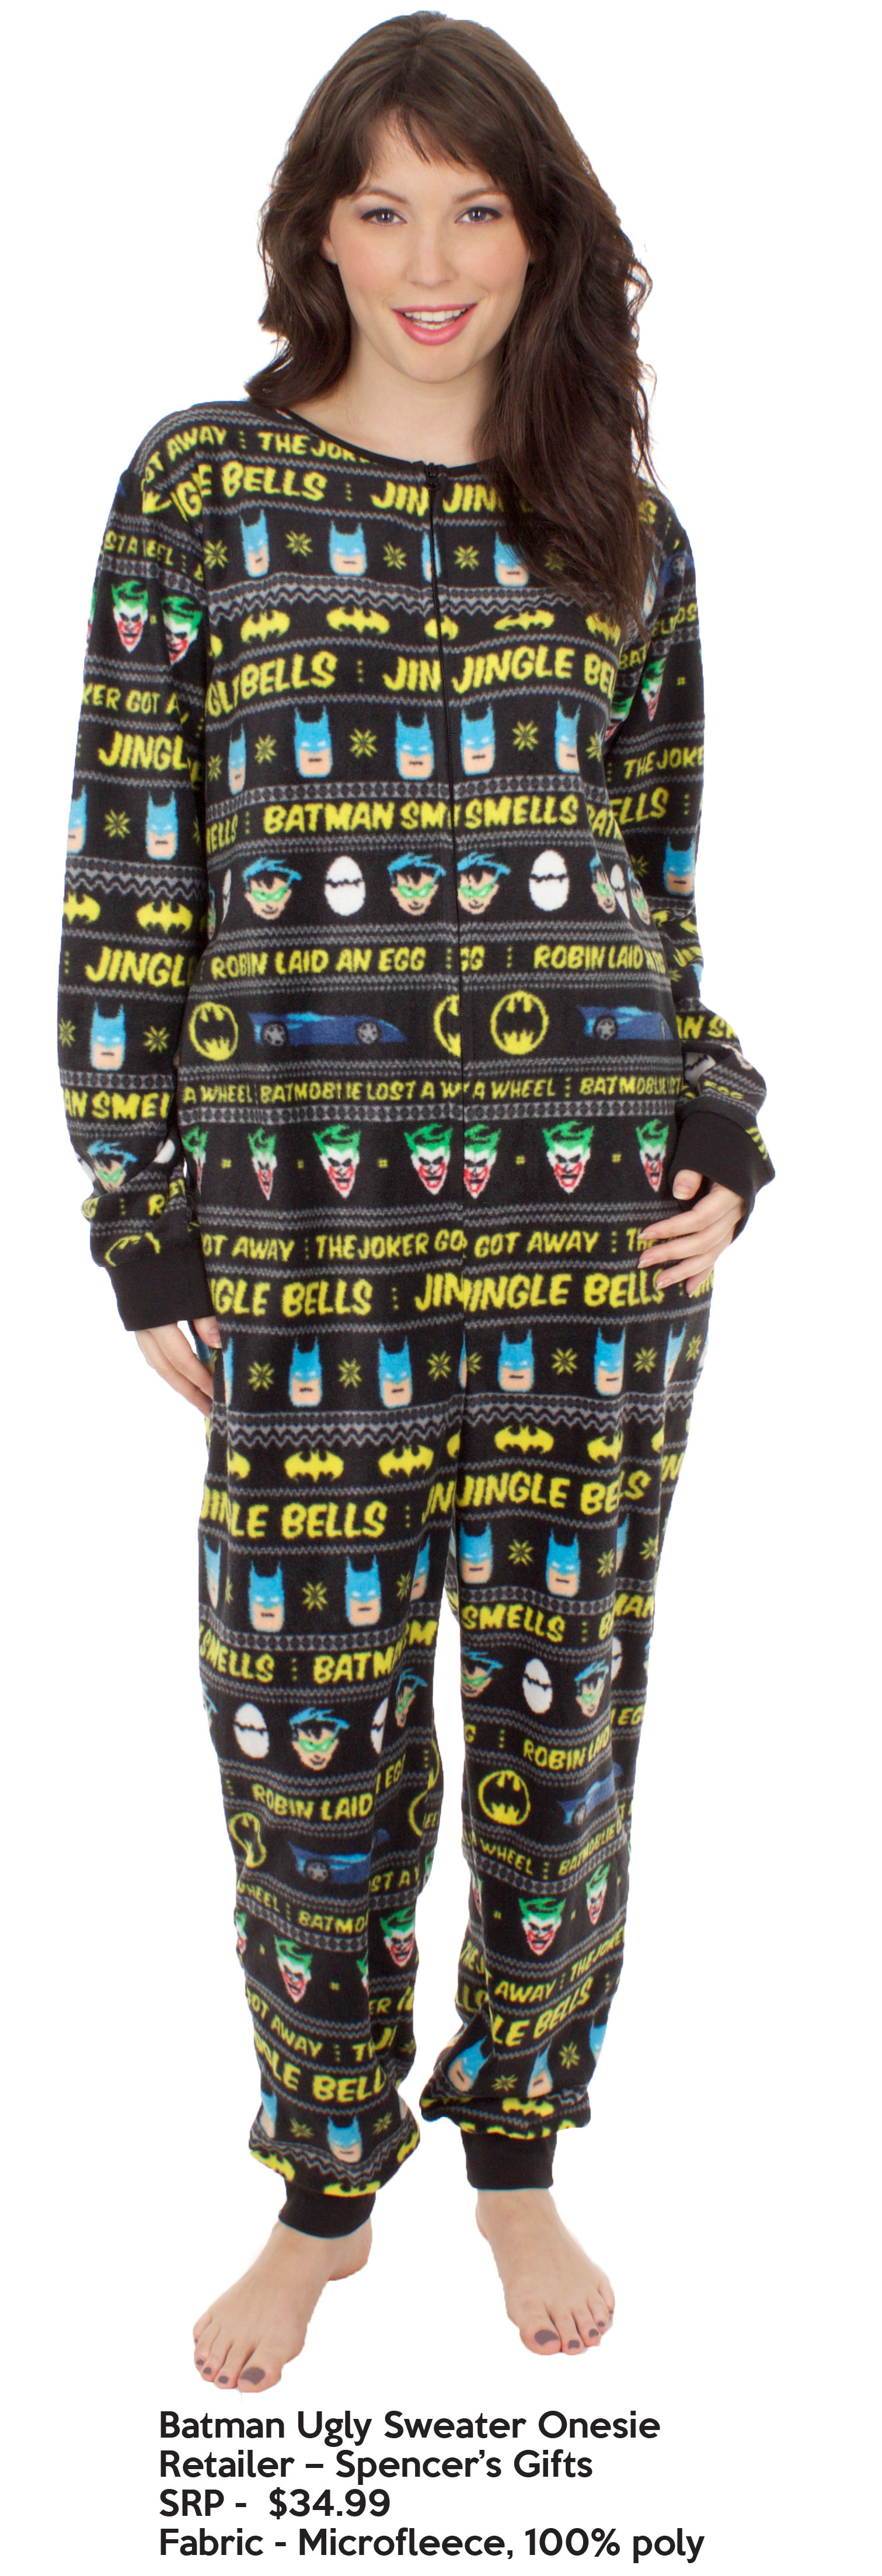 UnderGirlBatmanuglysweateronesie Celebrate The Holiday Season With Gifts From WB